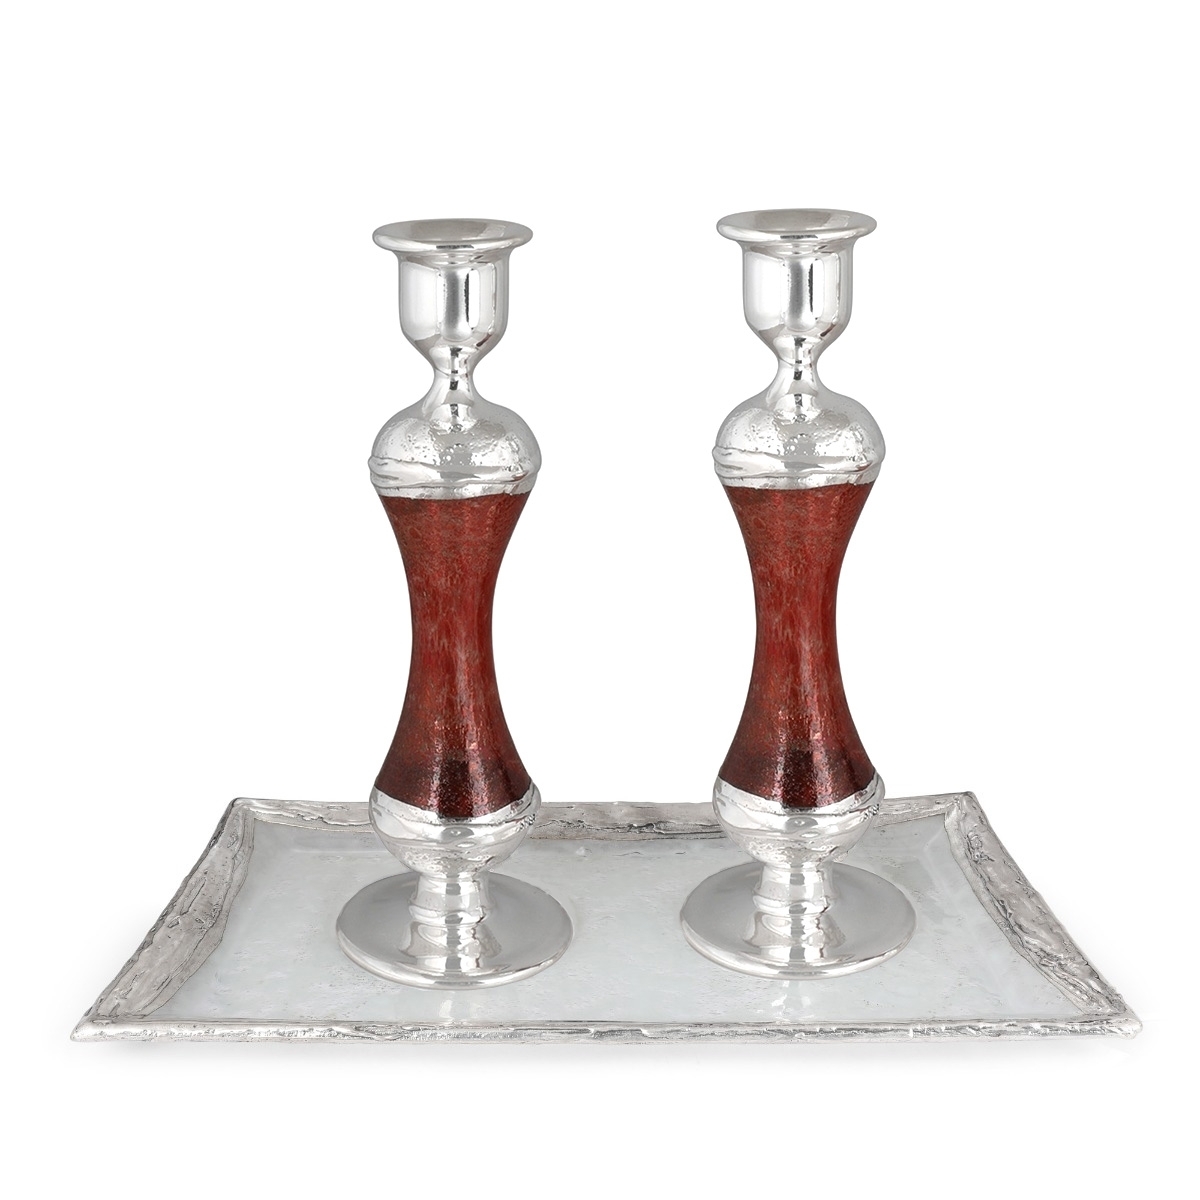 Tall Handcrafted Sterling Silver-Plated Red Glass Sabbath Candlesticks - 1